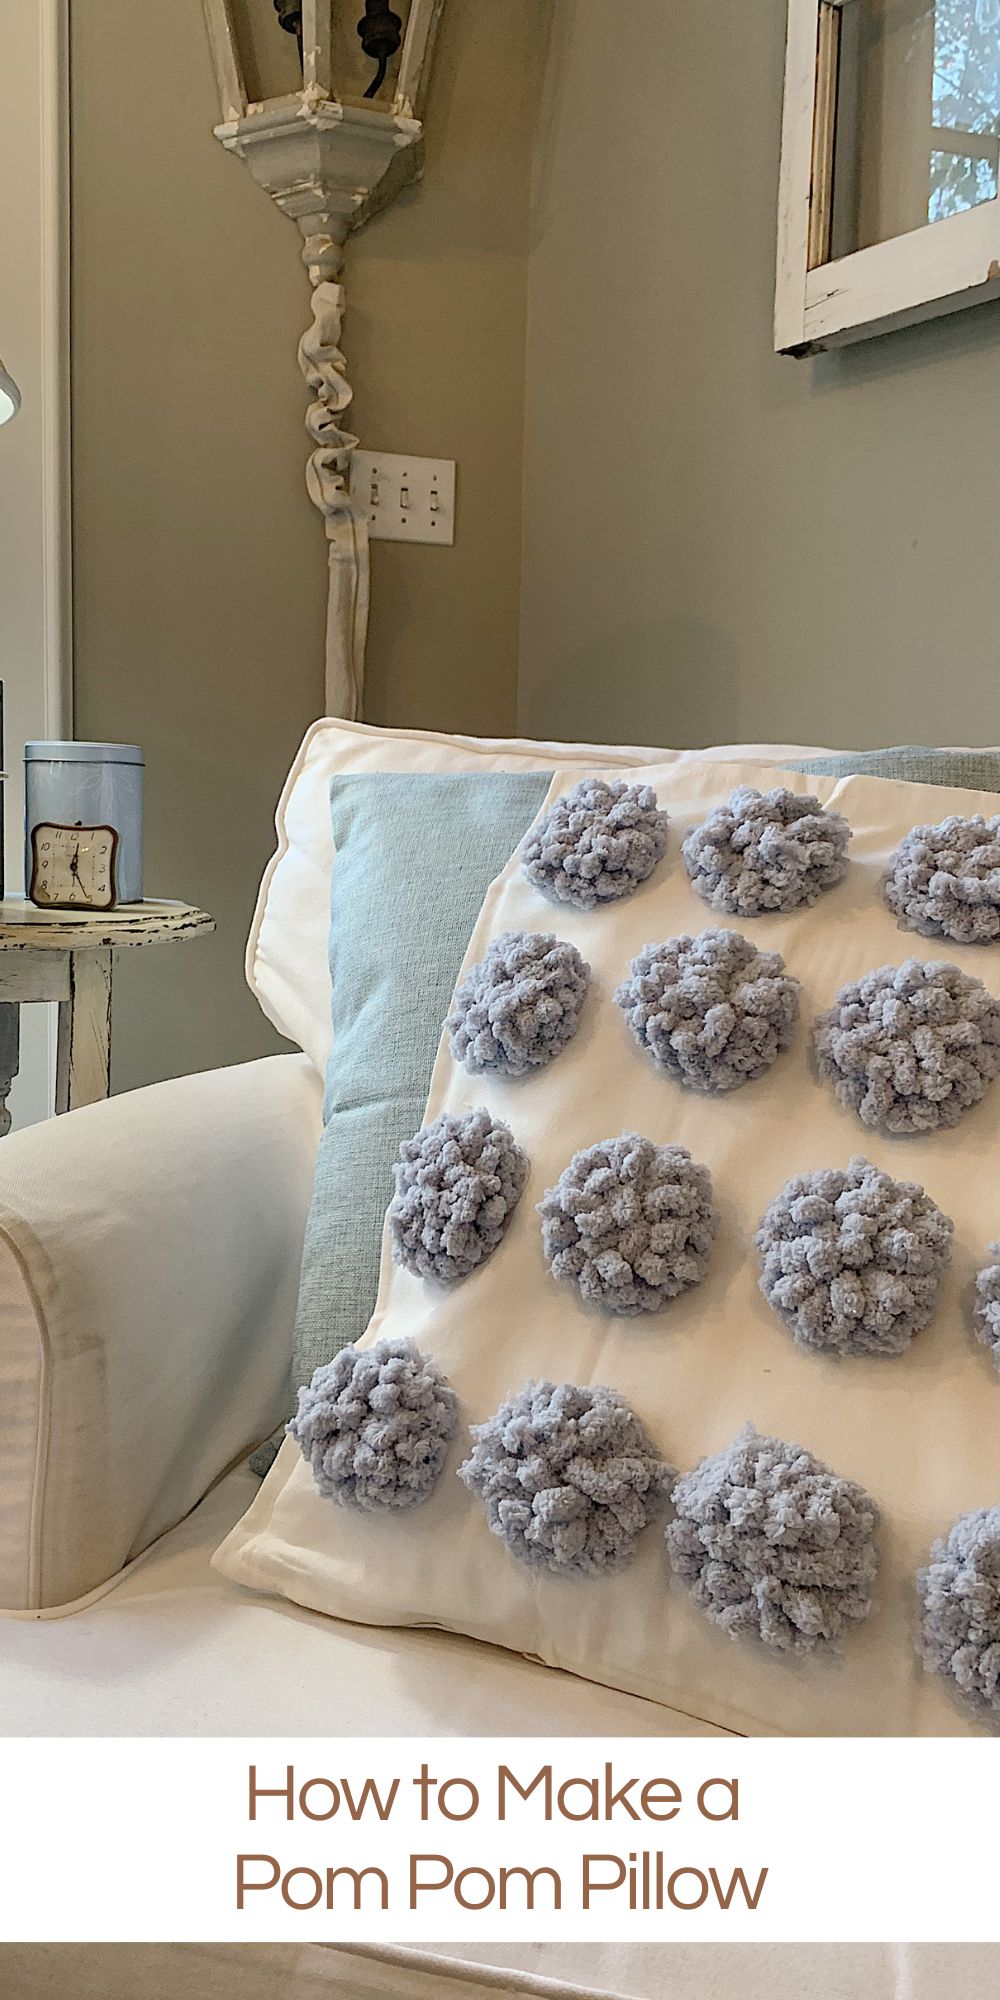 It's a warm and cozy time of the year and I have wanted to make a pom pom pillow for quite some time. I found this chenille yarn and really loved making these.